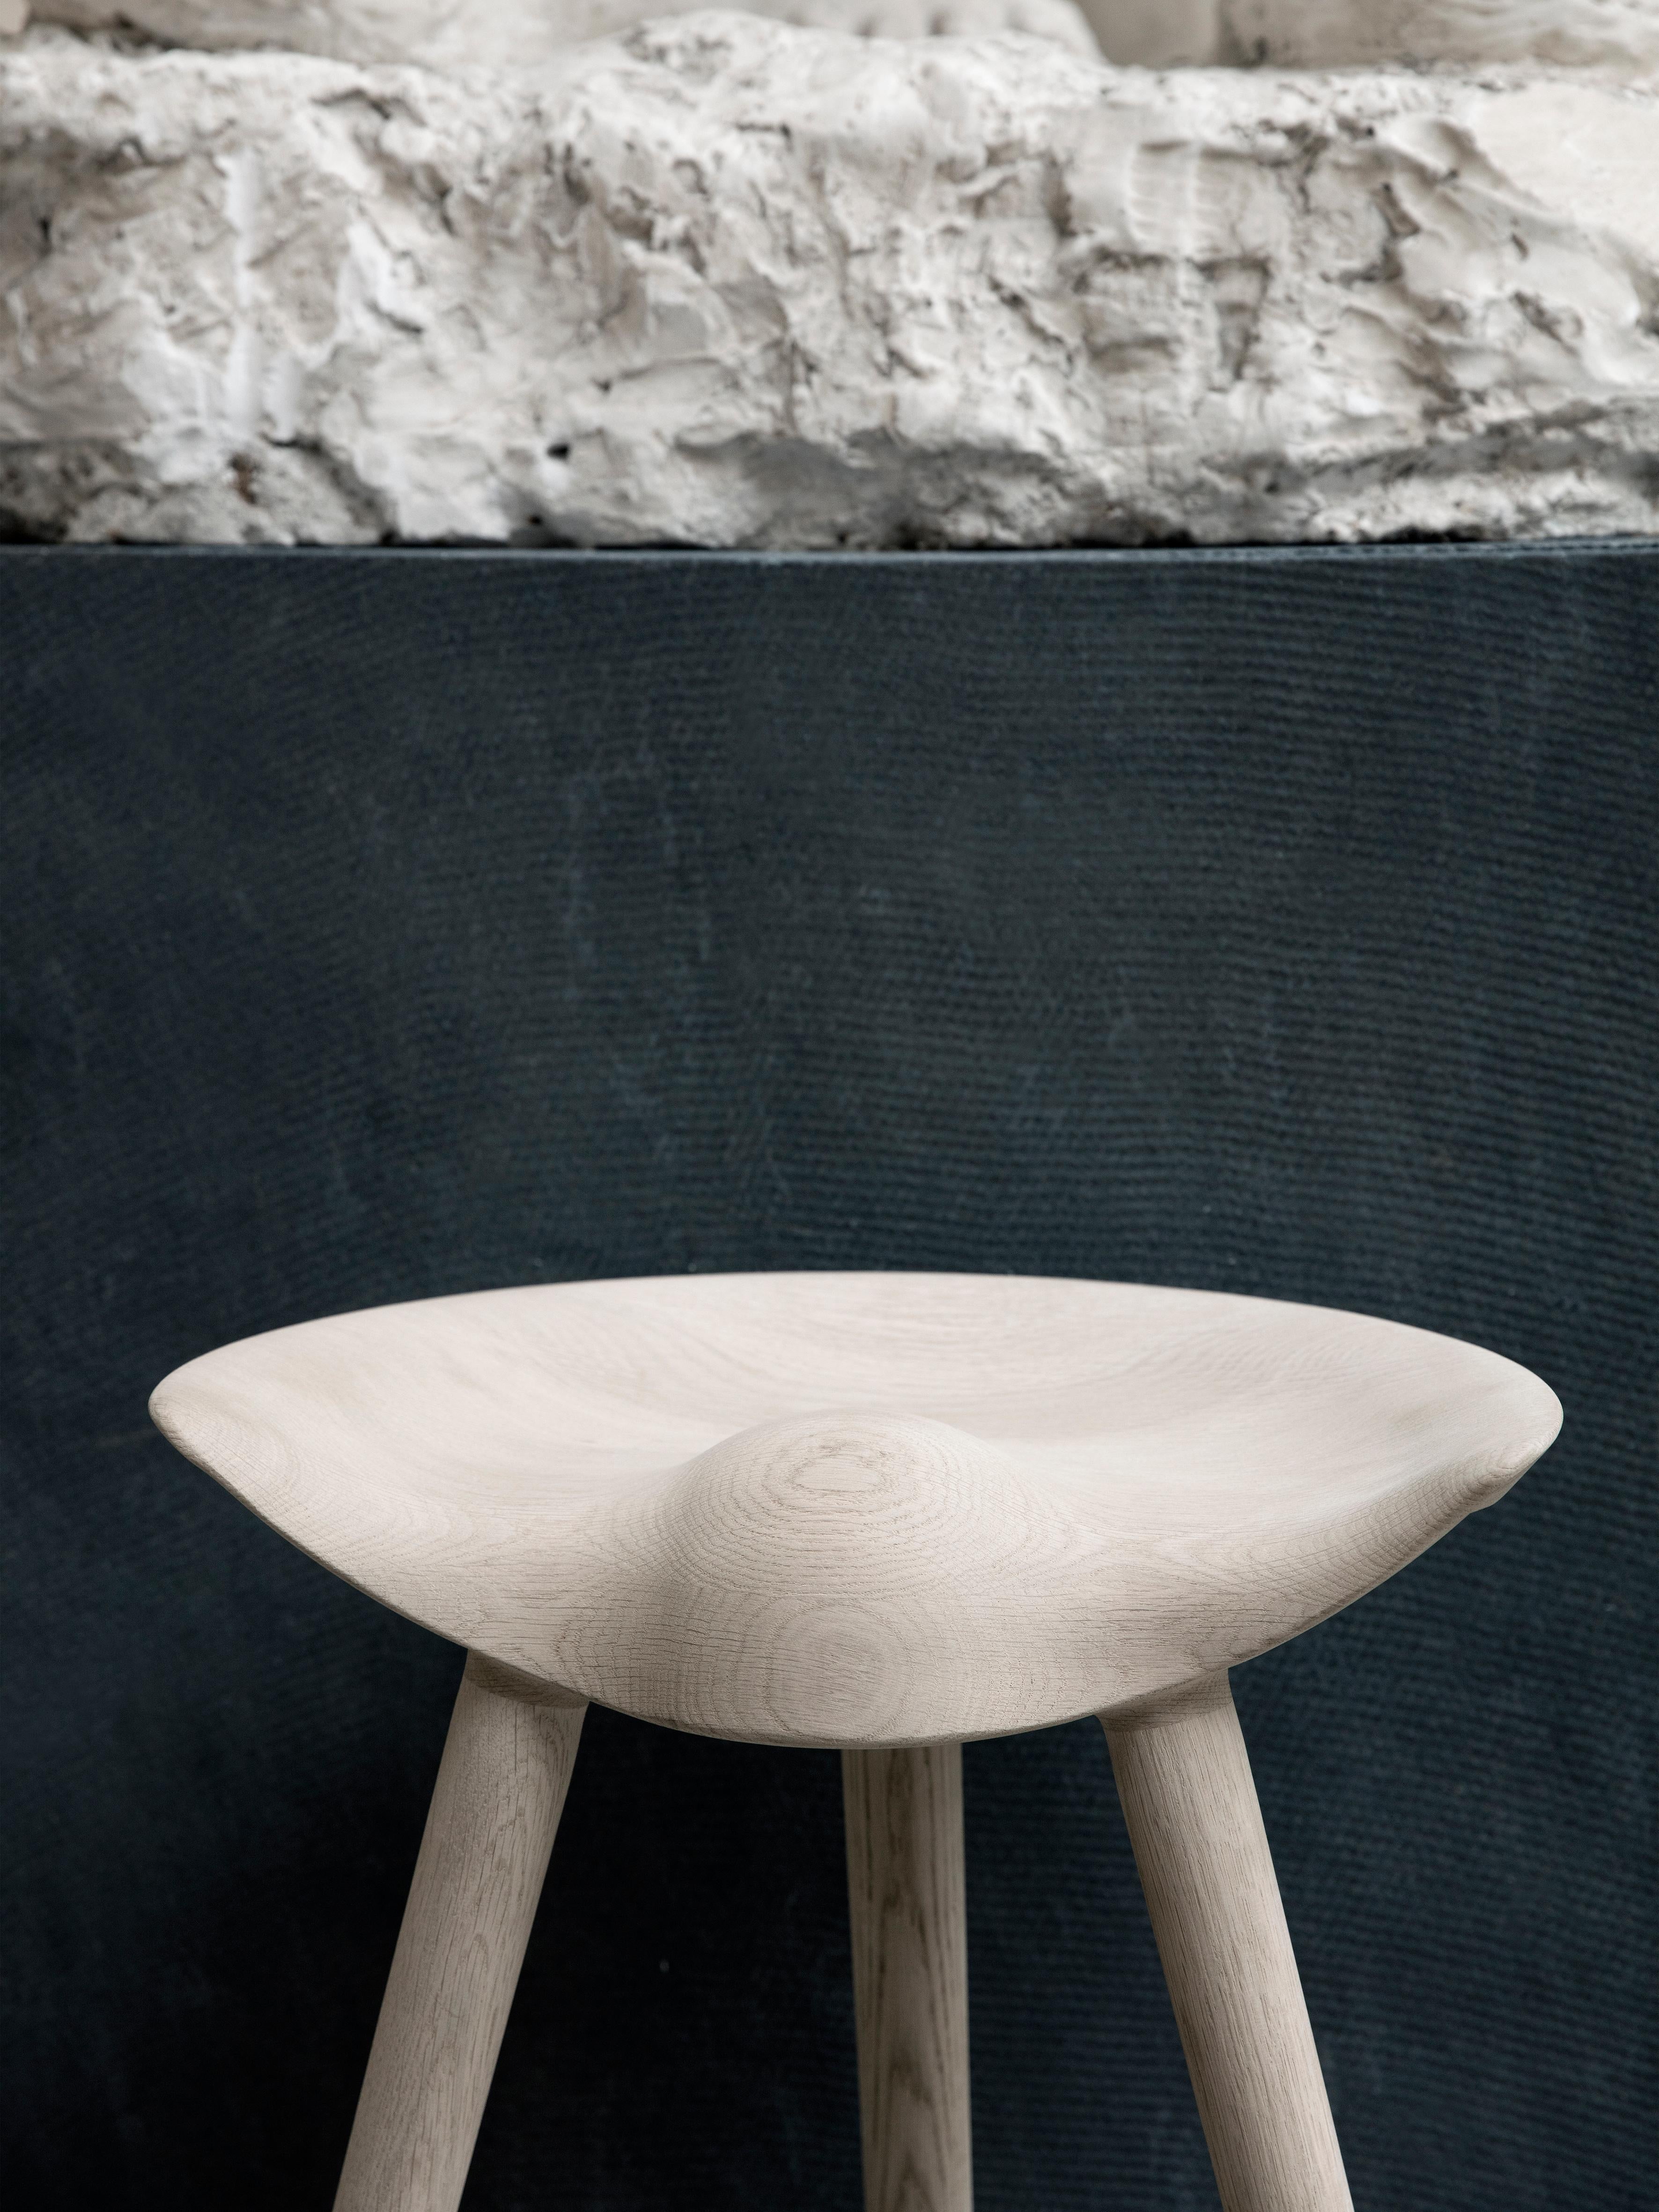 ML 42 Beige Oak Stool by Lassen
Dimensions: H 48 x W 36 x L 55.5 cm
Materials: Oak

In 1942 Mogens Lassen designed the Stool ML42 as a piece for a furniture exhibition held at the Danish Museum of Decorative Art. He took inspiration from the stools